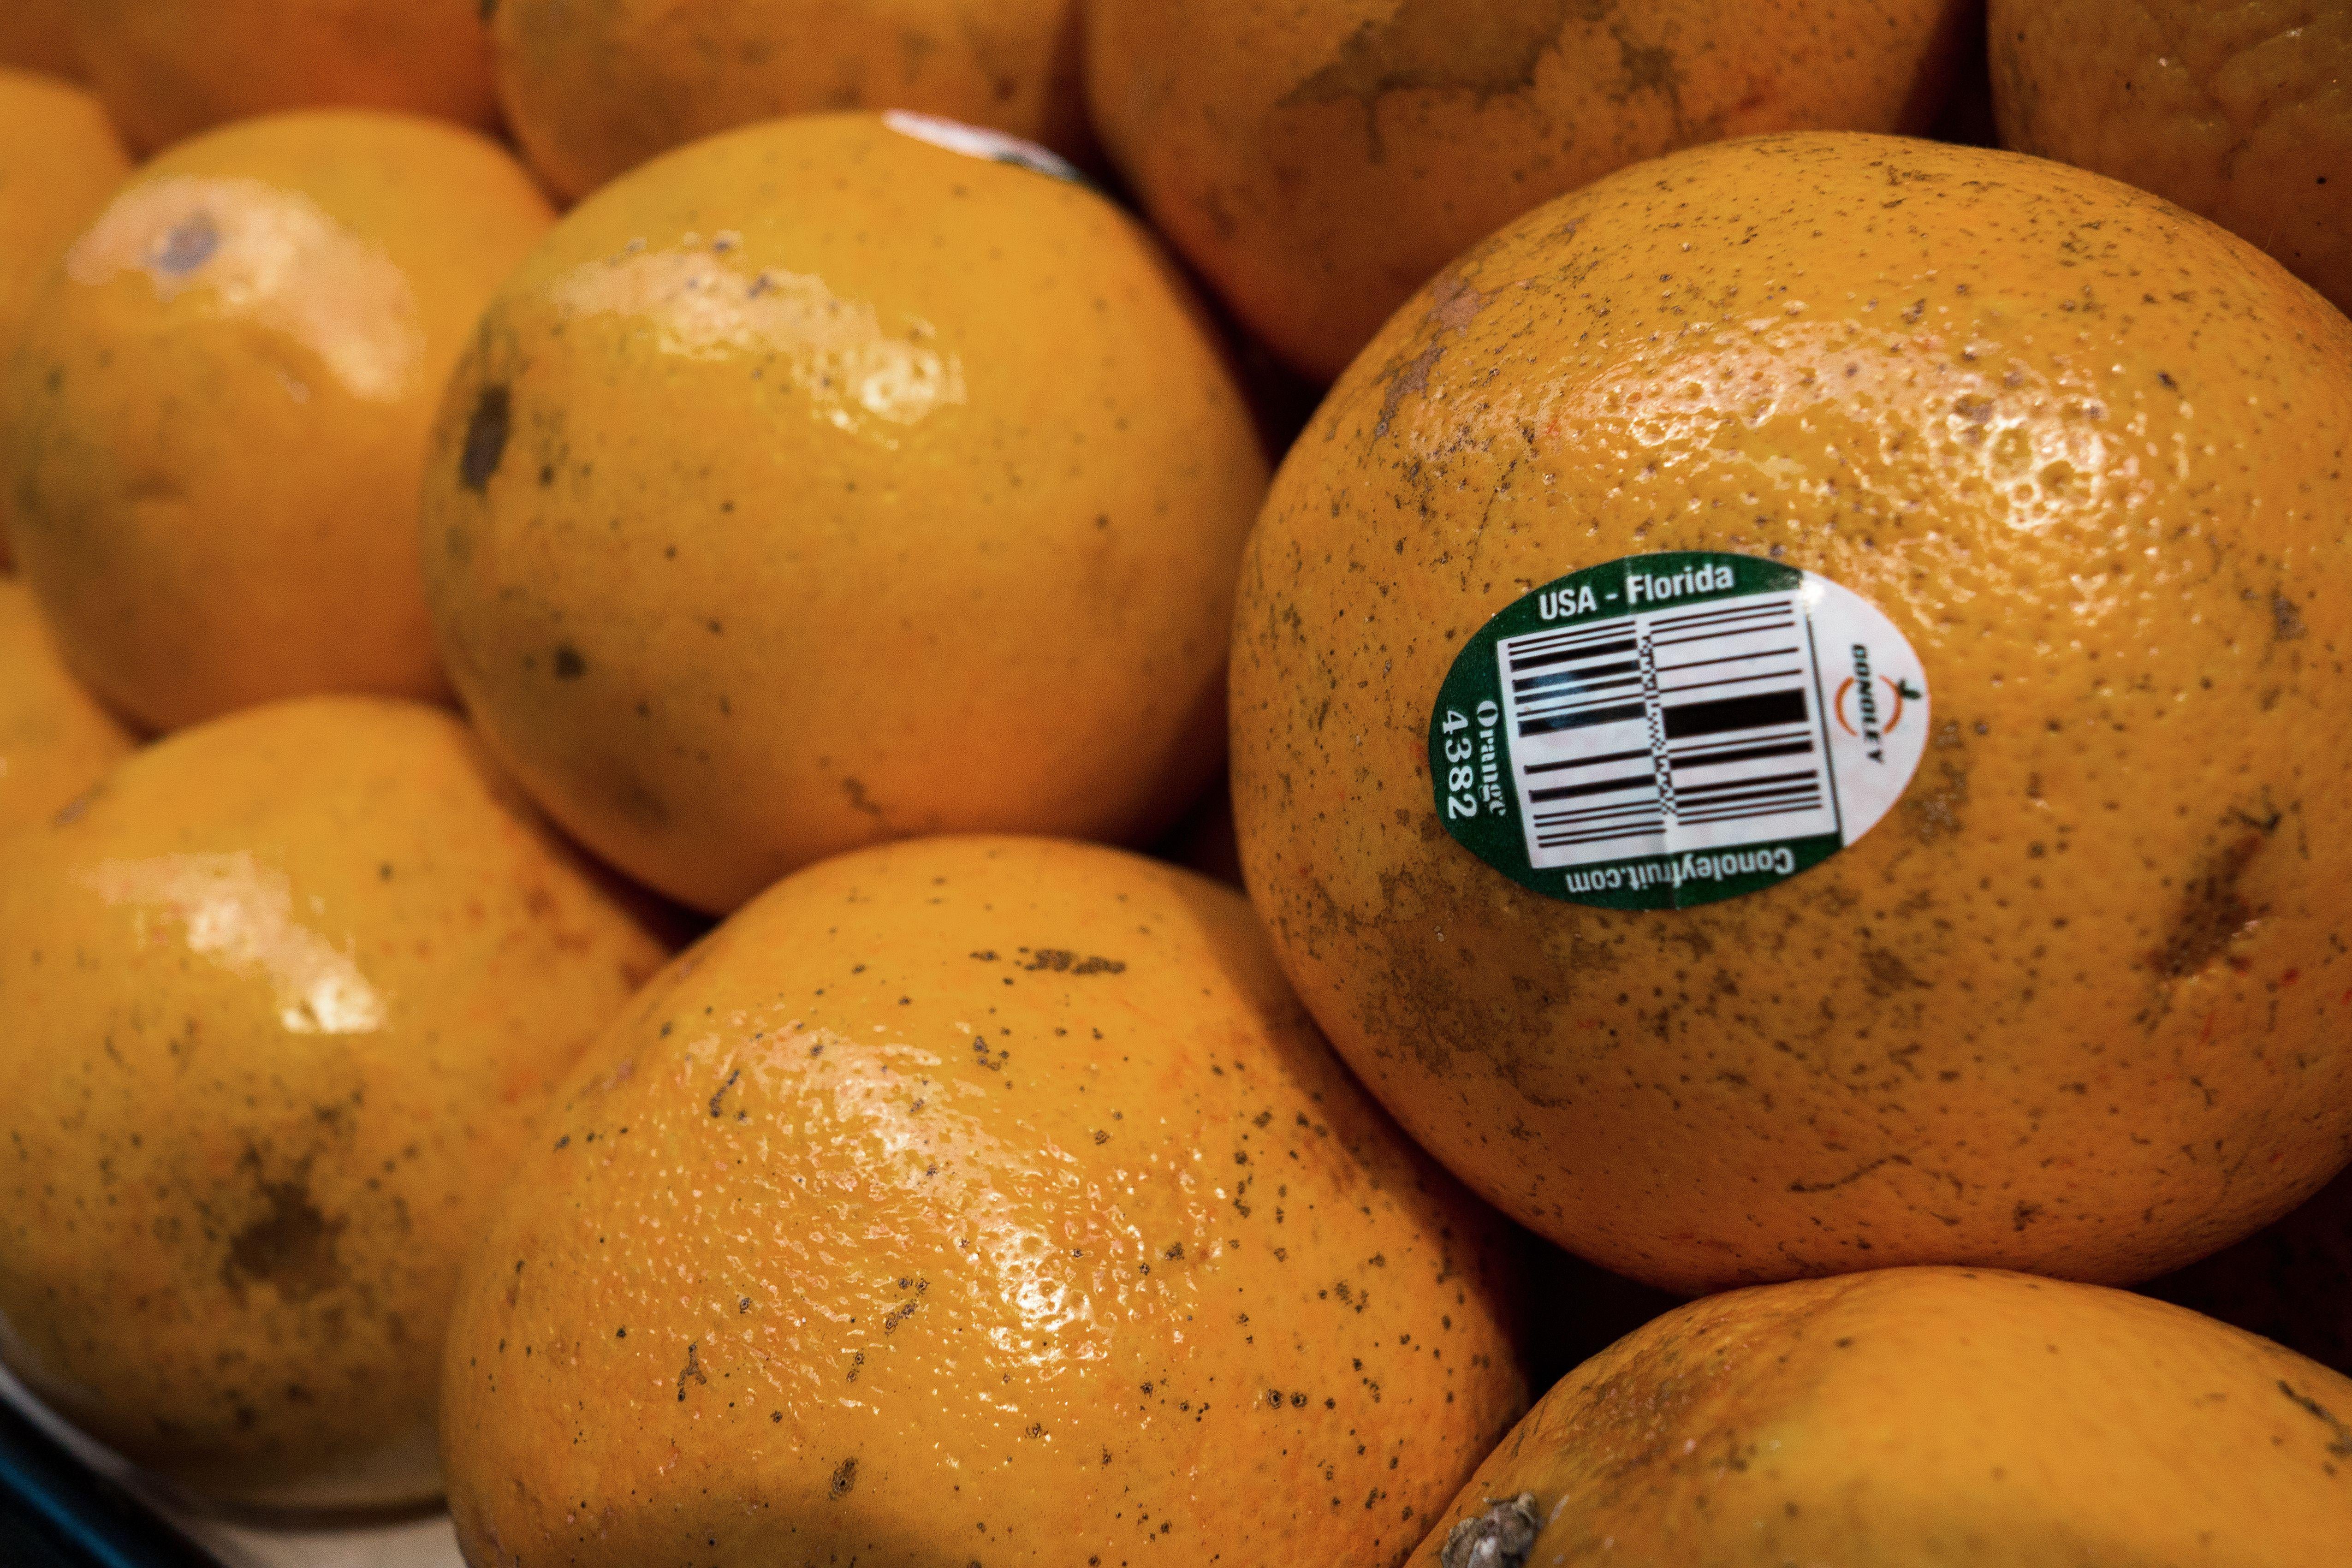 Florida oranges for sale in Washington in 2014.